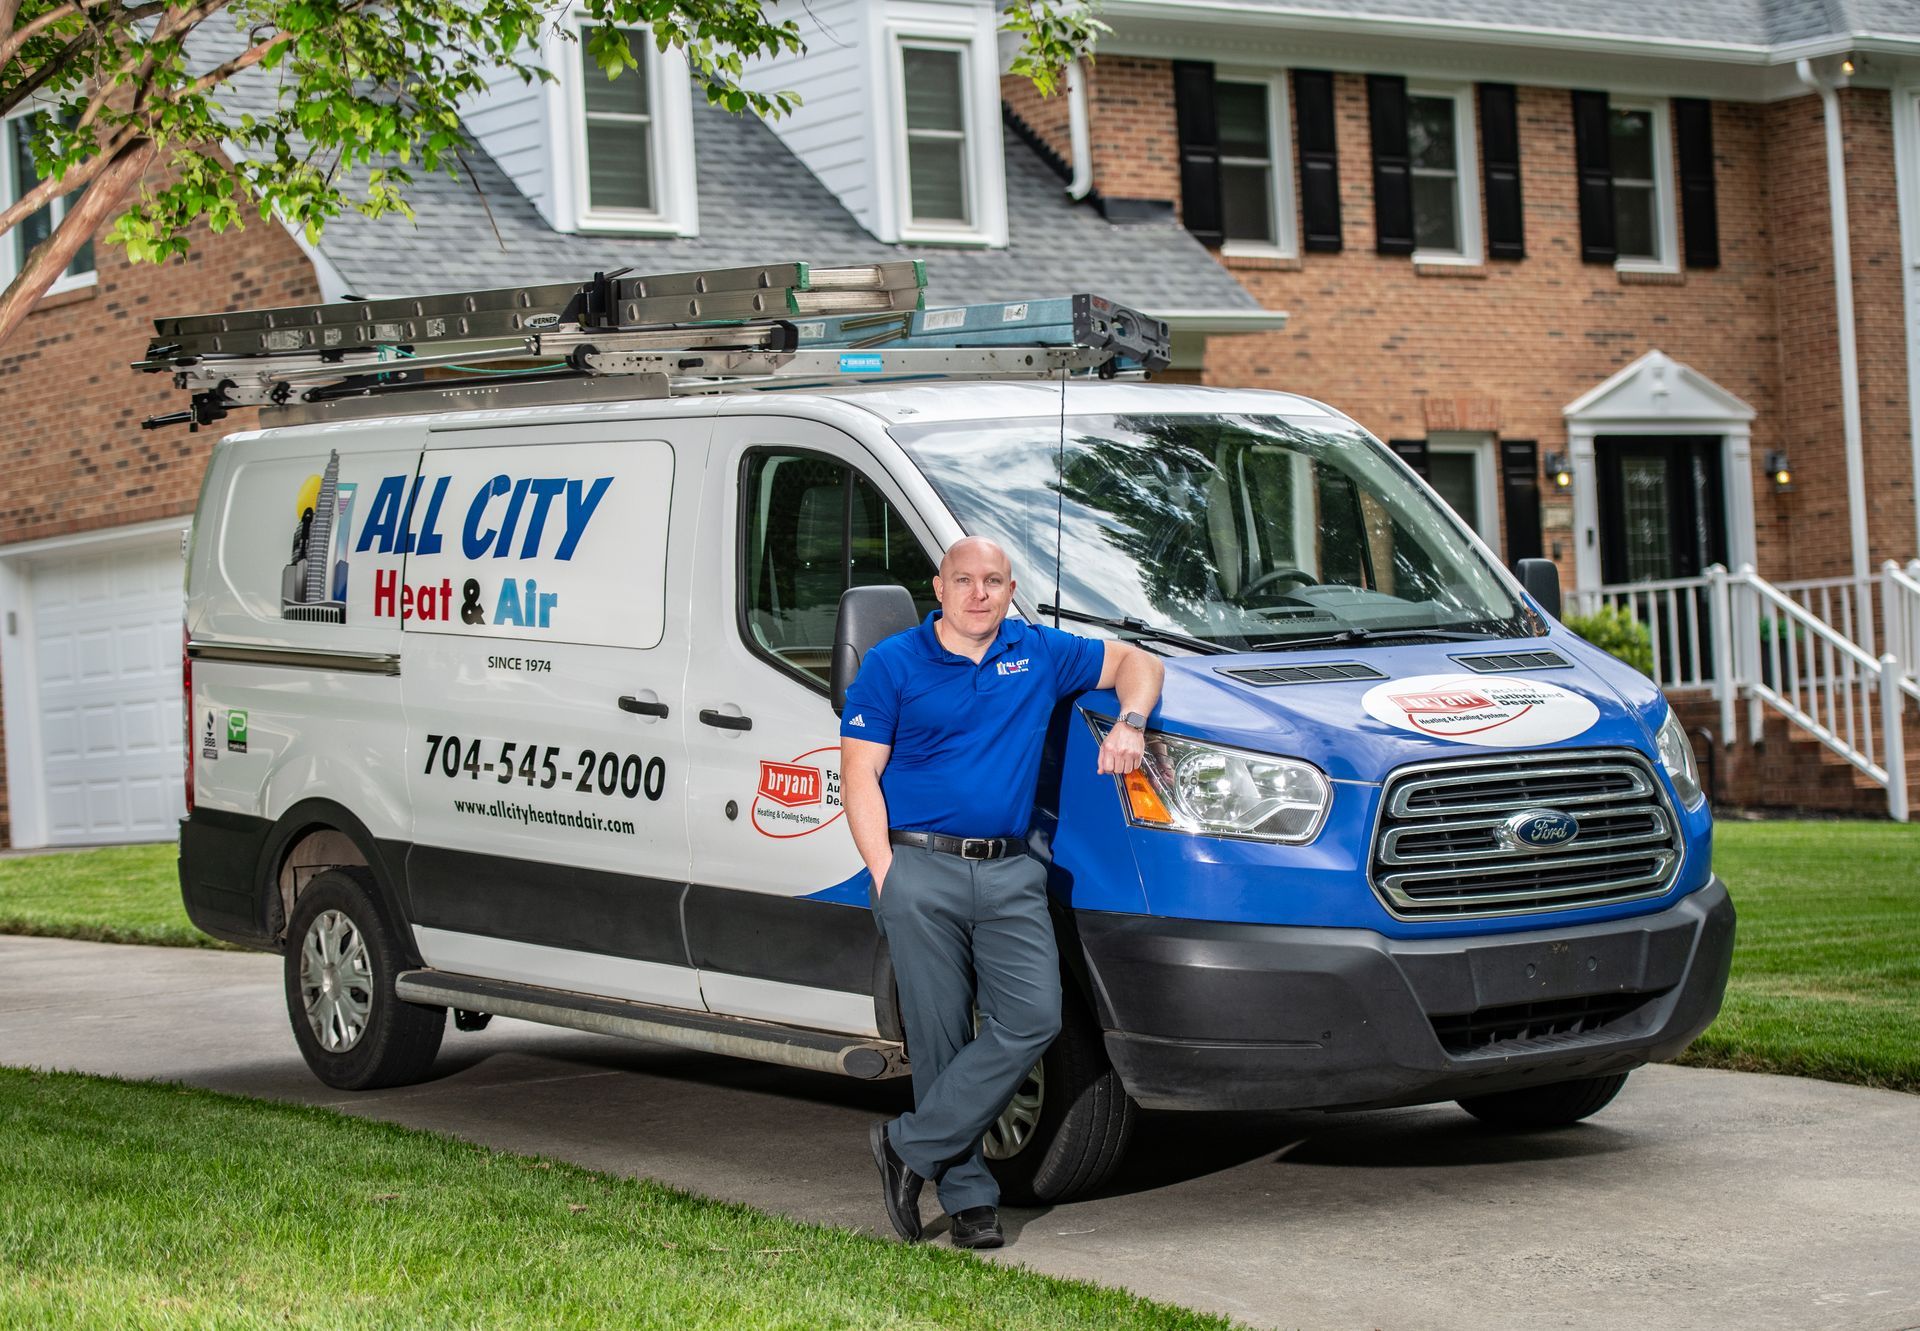 An All City Heat and Air technician is standing in front of an All City Heat and Air van in front of home.